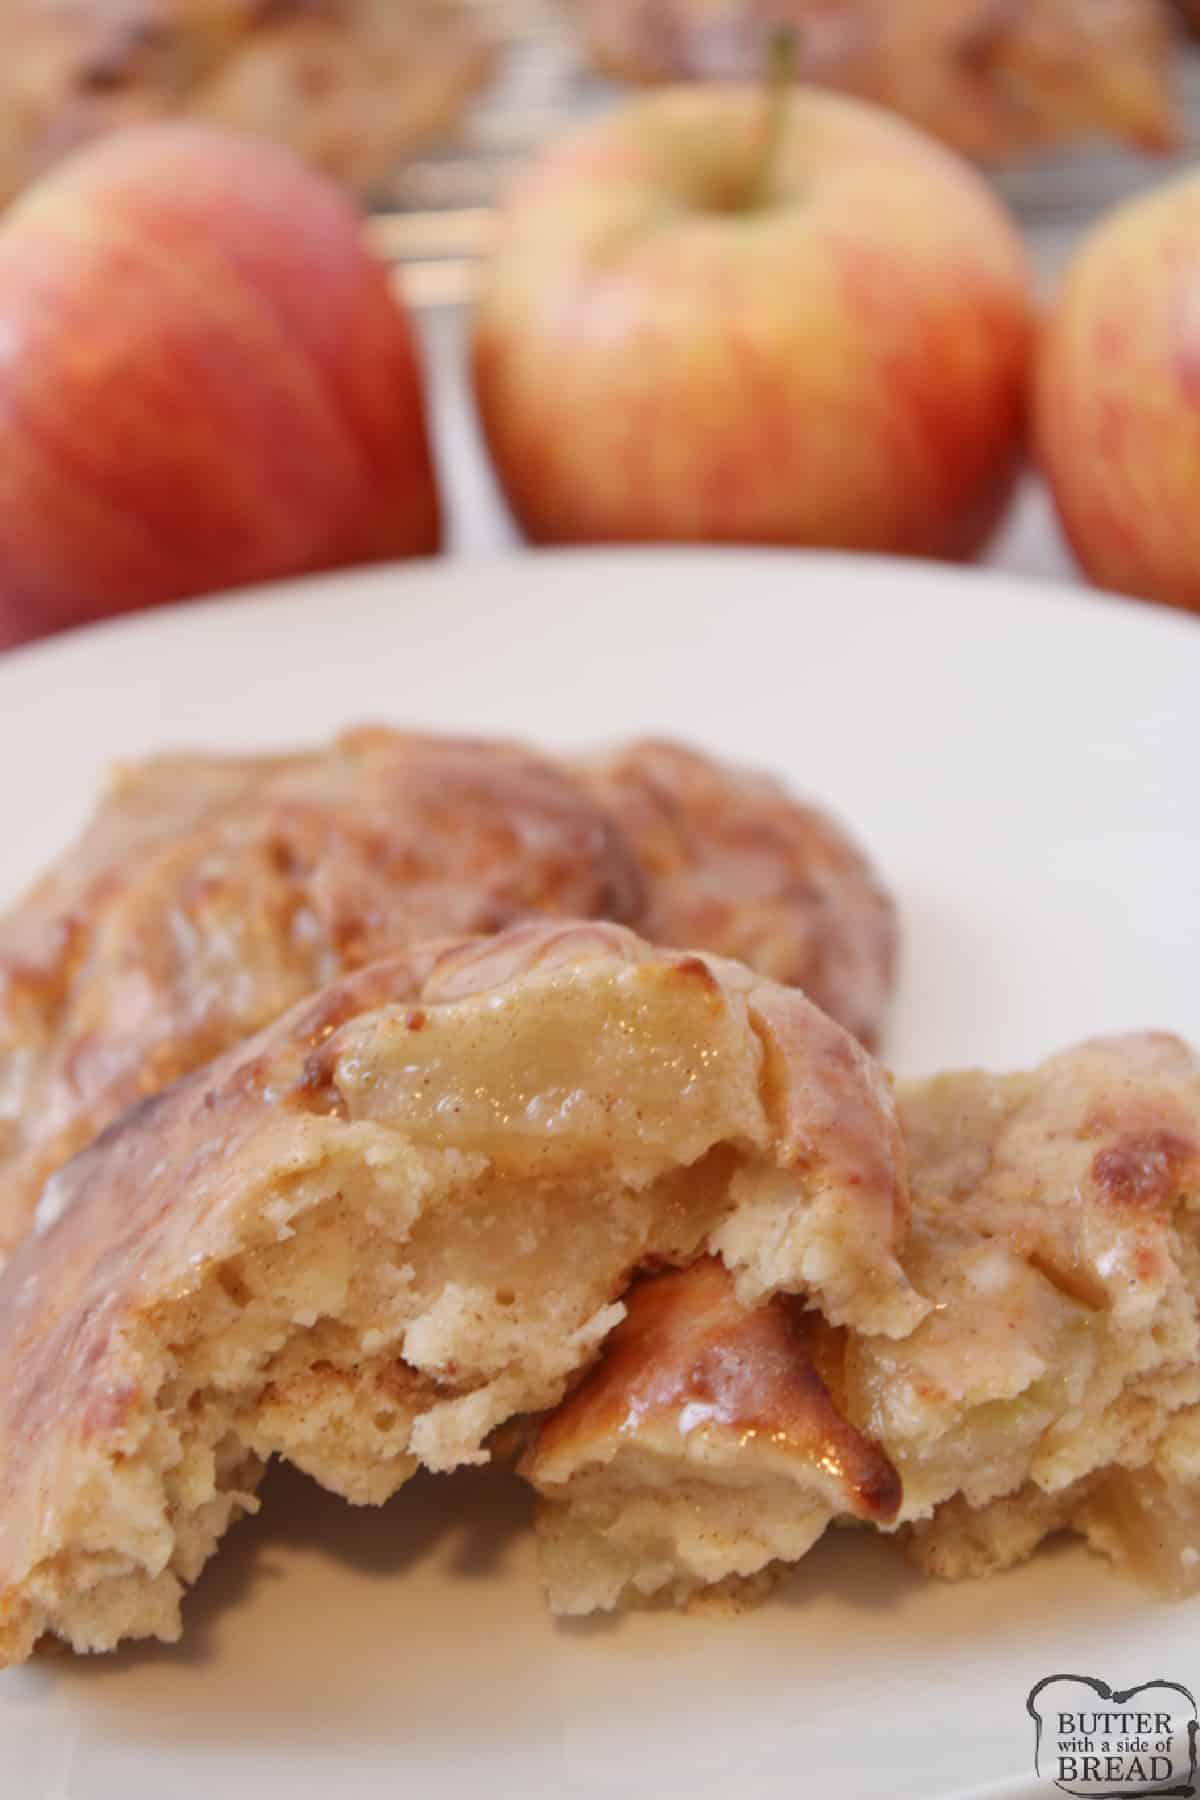 Air Fryer Apple Fritters are fluffy on the inside and have a crunch on the outside just like a classic apple fritter. No oil needed for frying, and these simple pastries are even better when topped with a simple cinnamon glaze. 